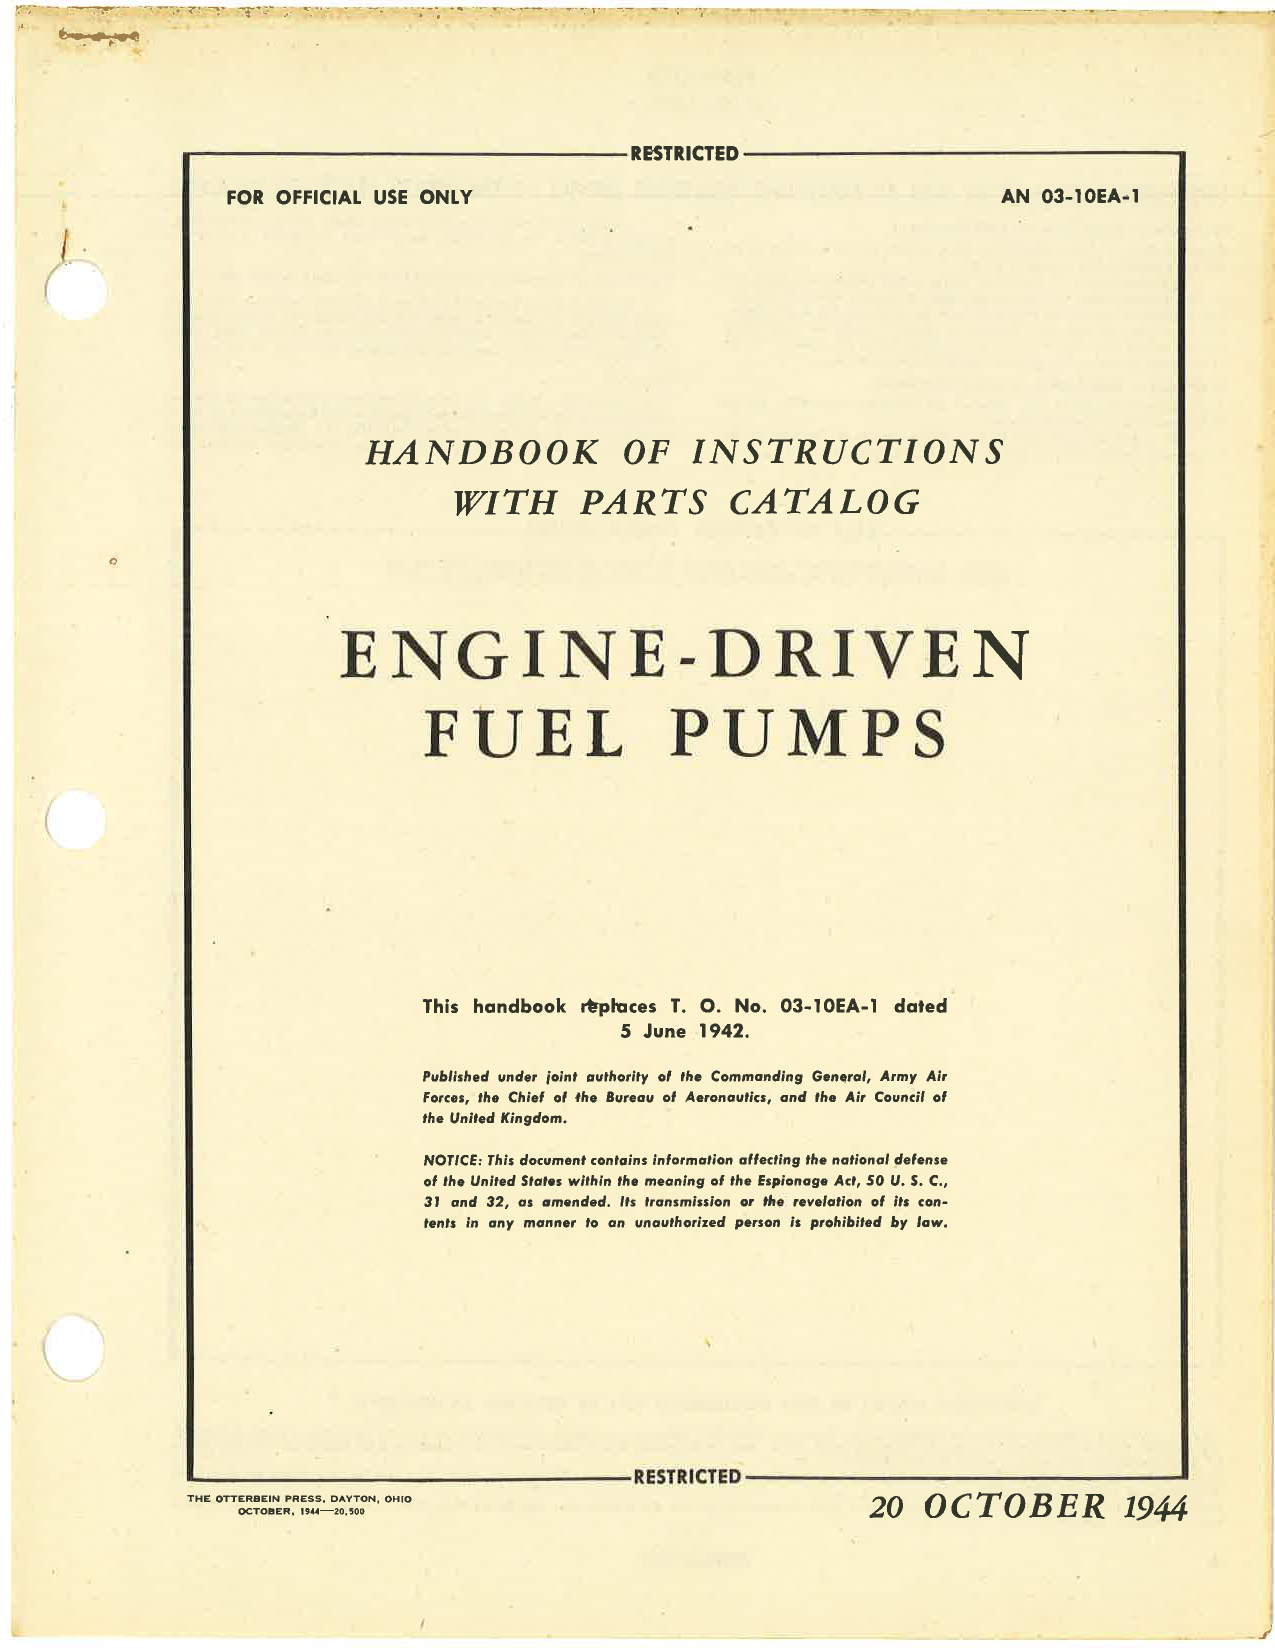 Sample page 7 from AirCorps Library document: Handbook of Instructions with Parts Catalog for Engine-Driven Fuel Pumps